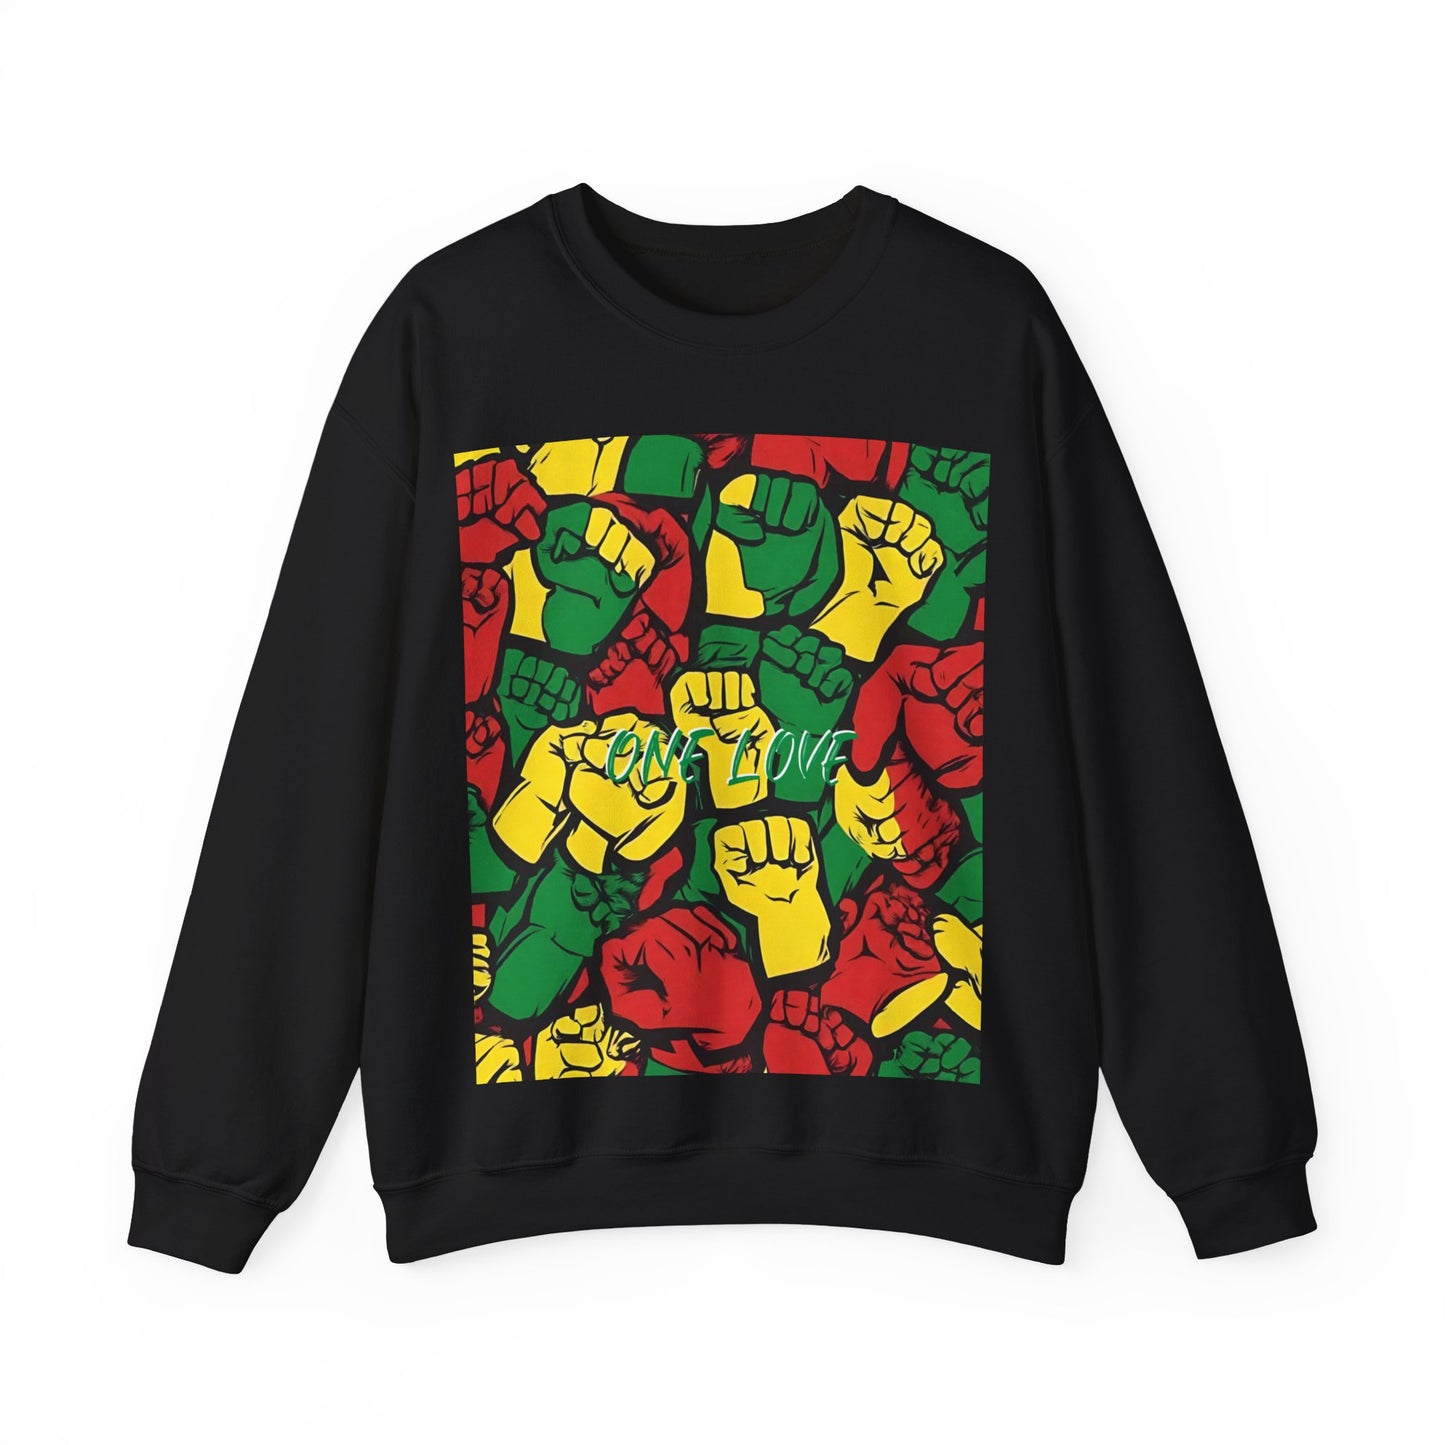 ONE LOVE CLENCHED FIST DESIGN SWEATSHIRT GIFT